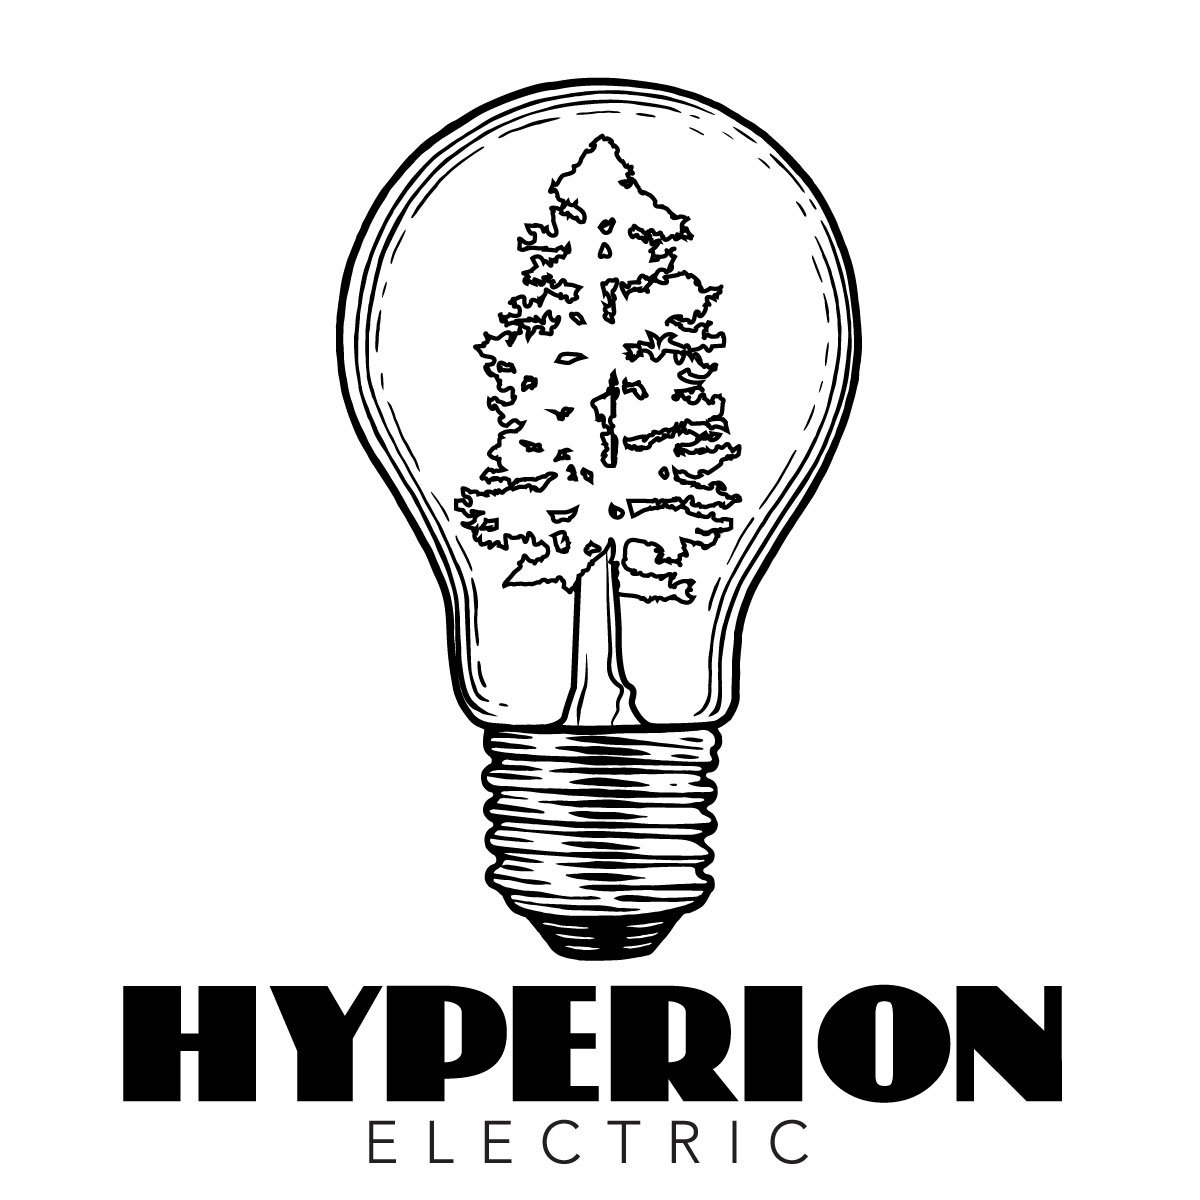 Hyperion Electric